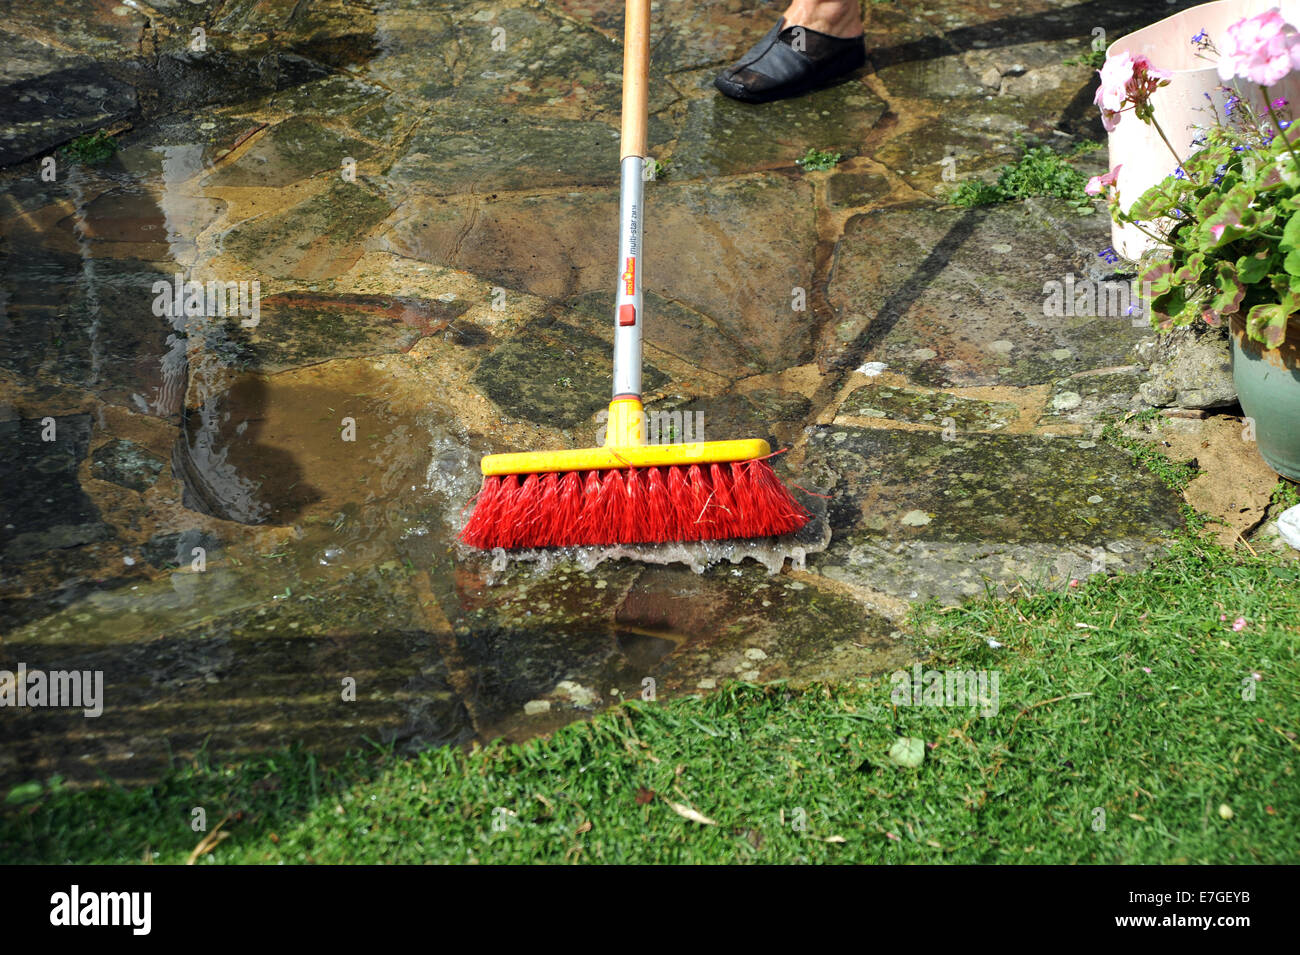 Scrubbing clean a garden patio with orange bristled broom brush and water Stock Photo